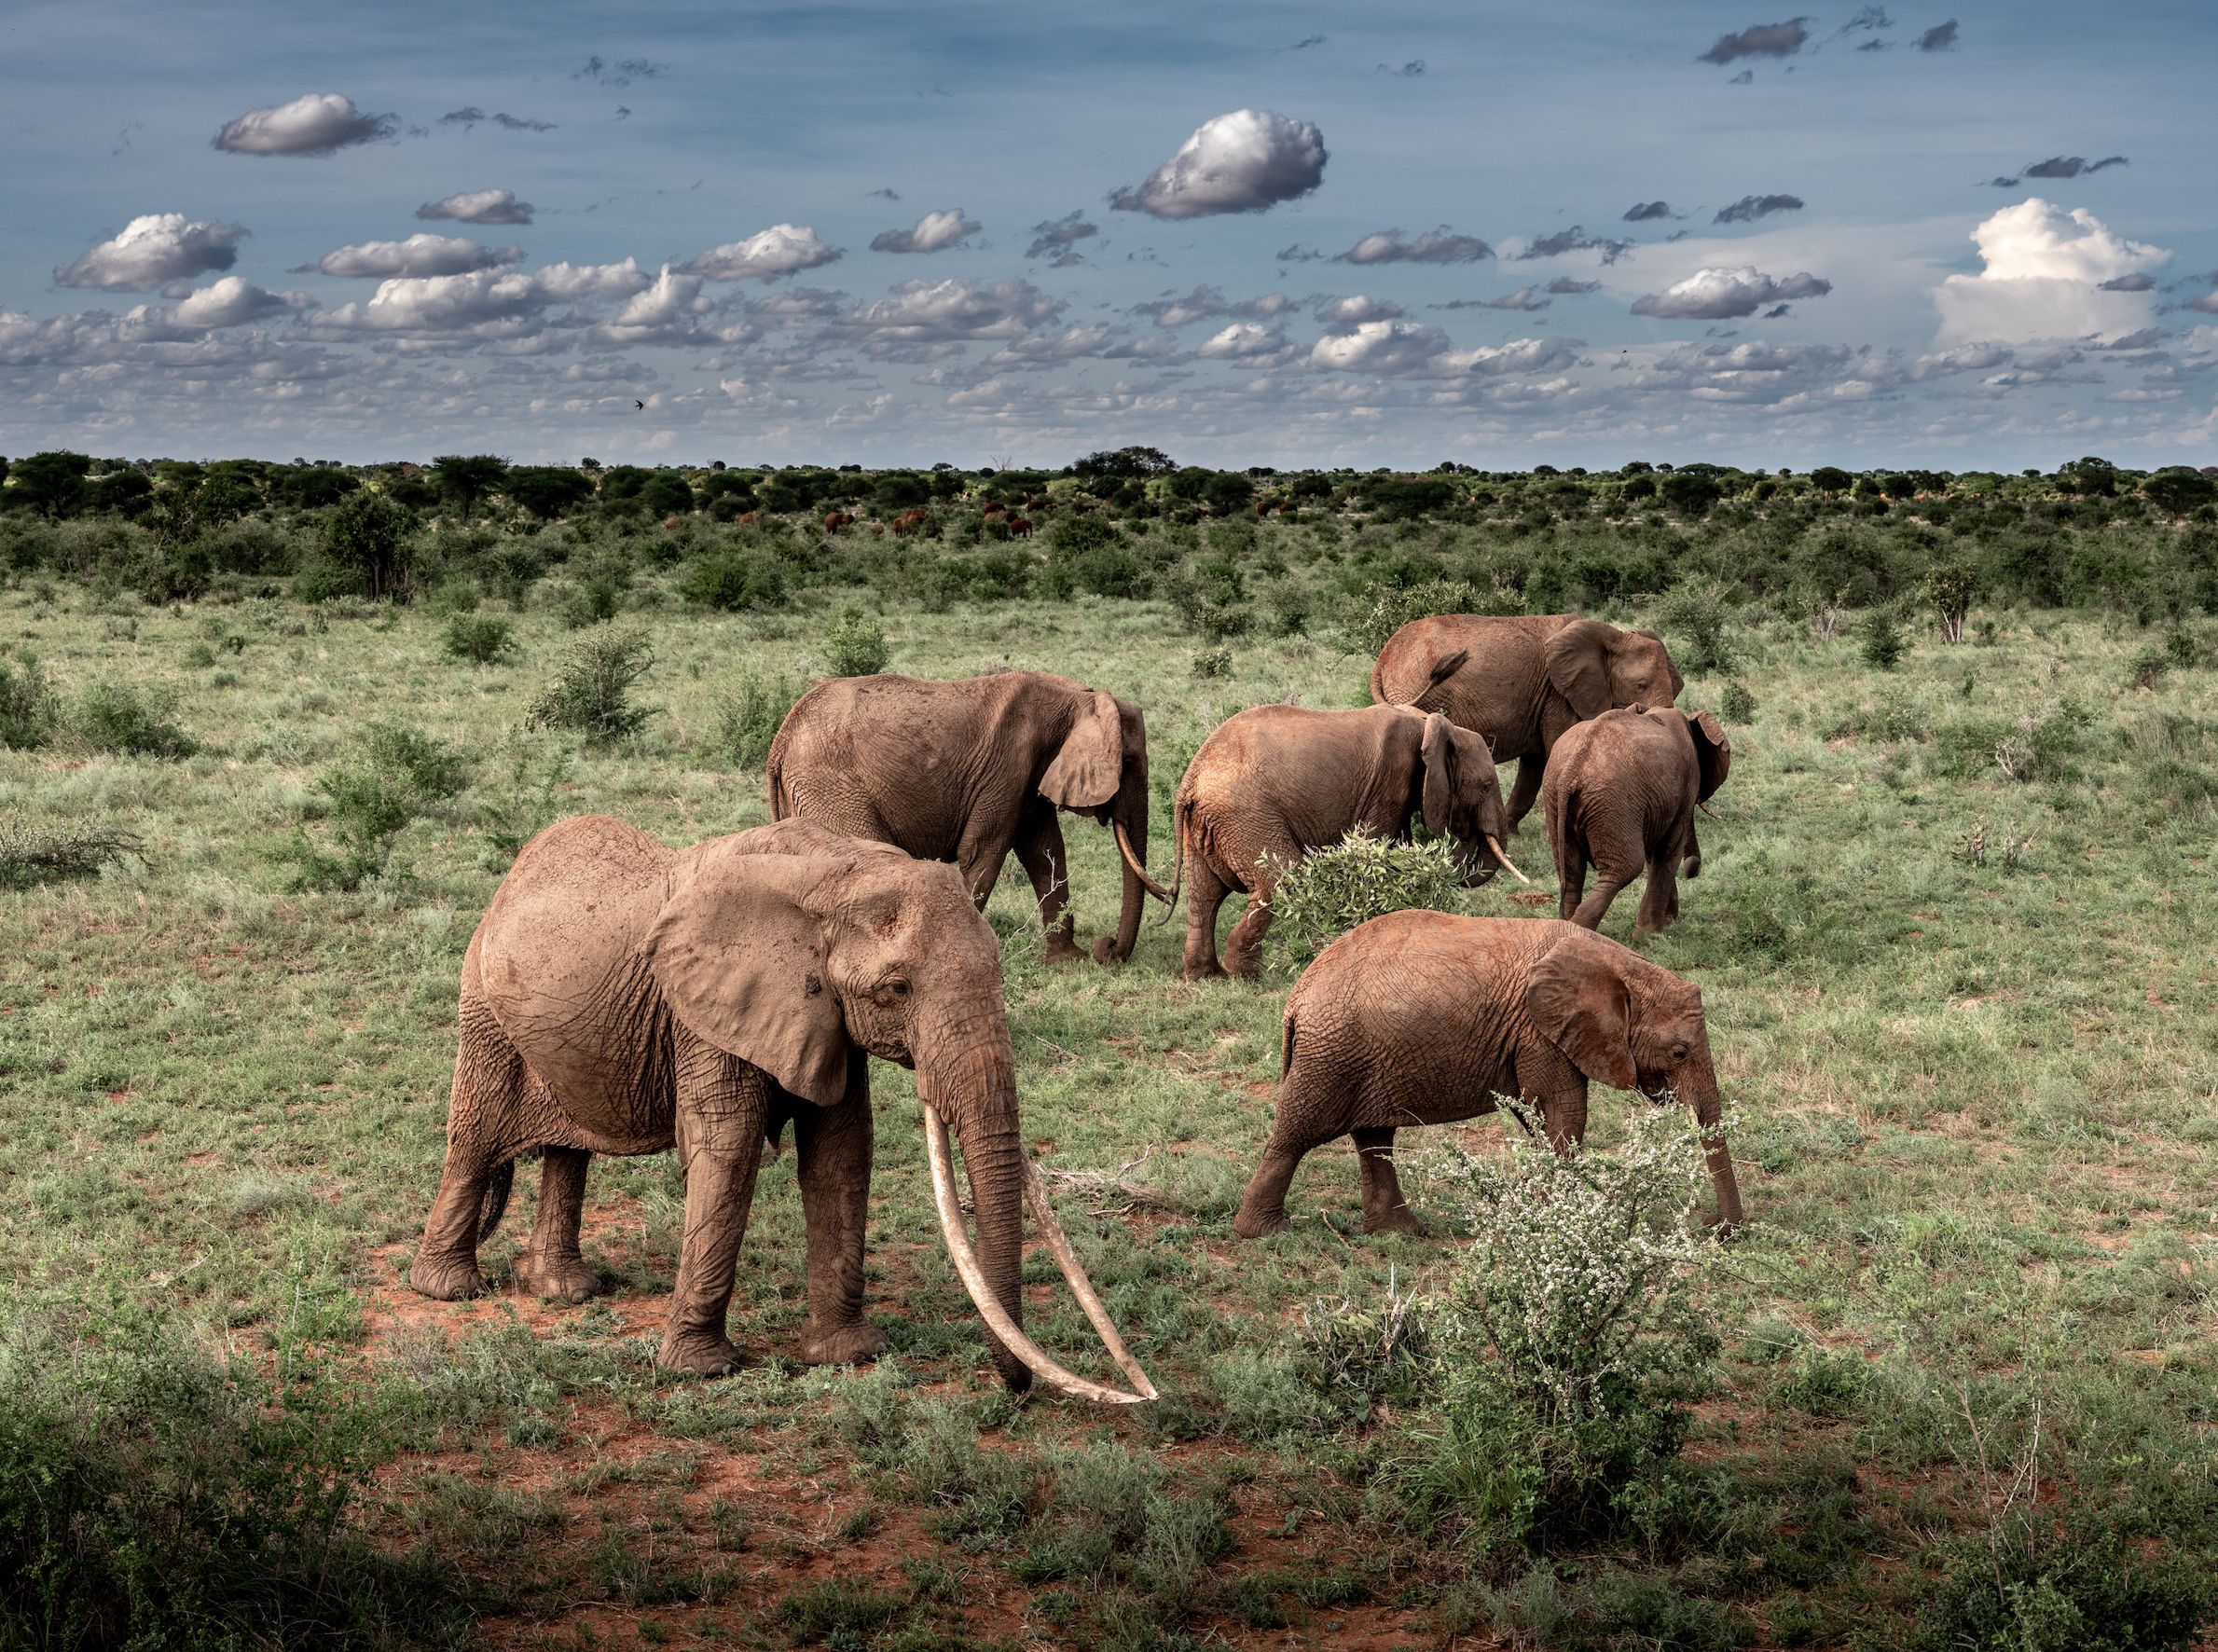 What makes the Tsavo Conservation Area such an inspiring place?